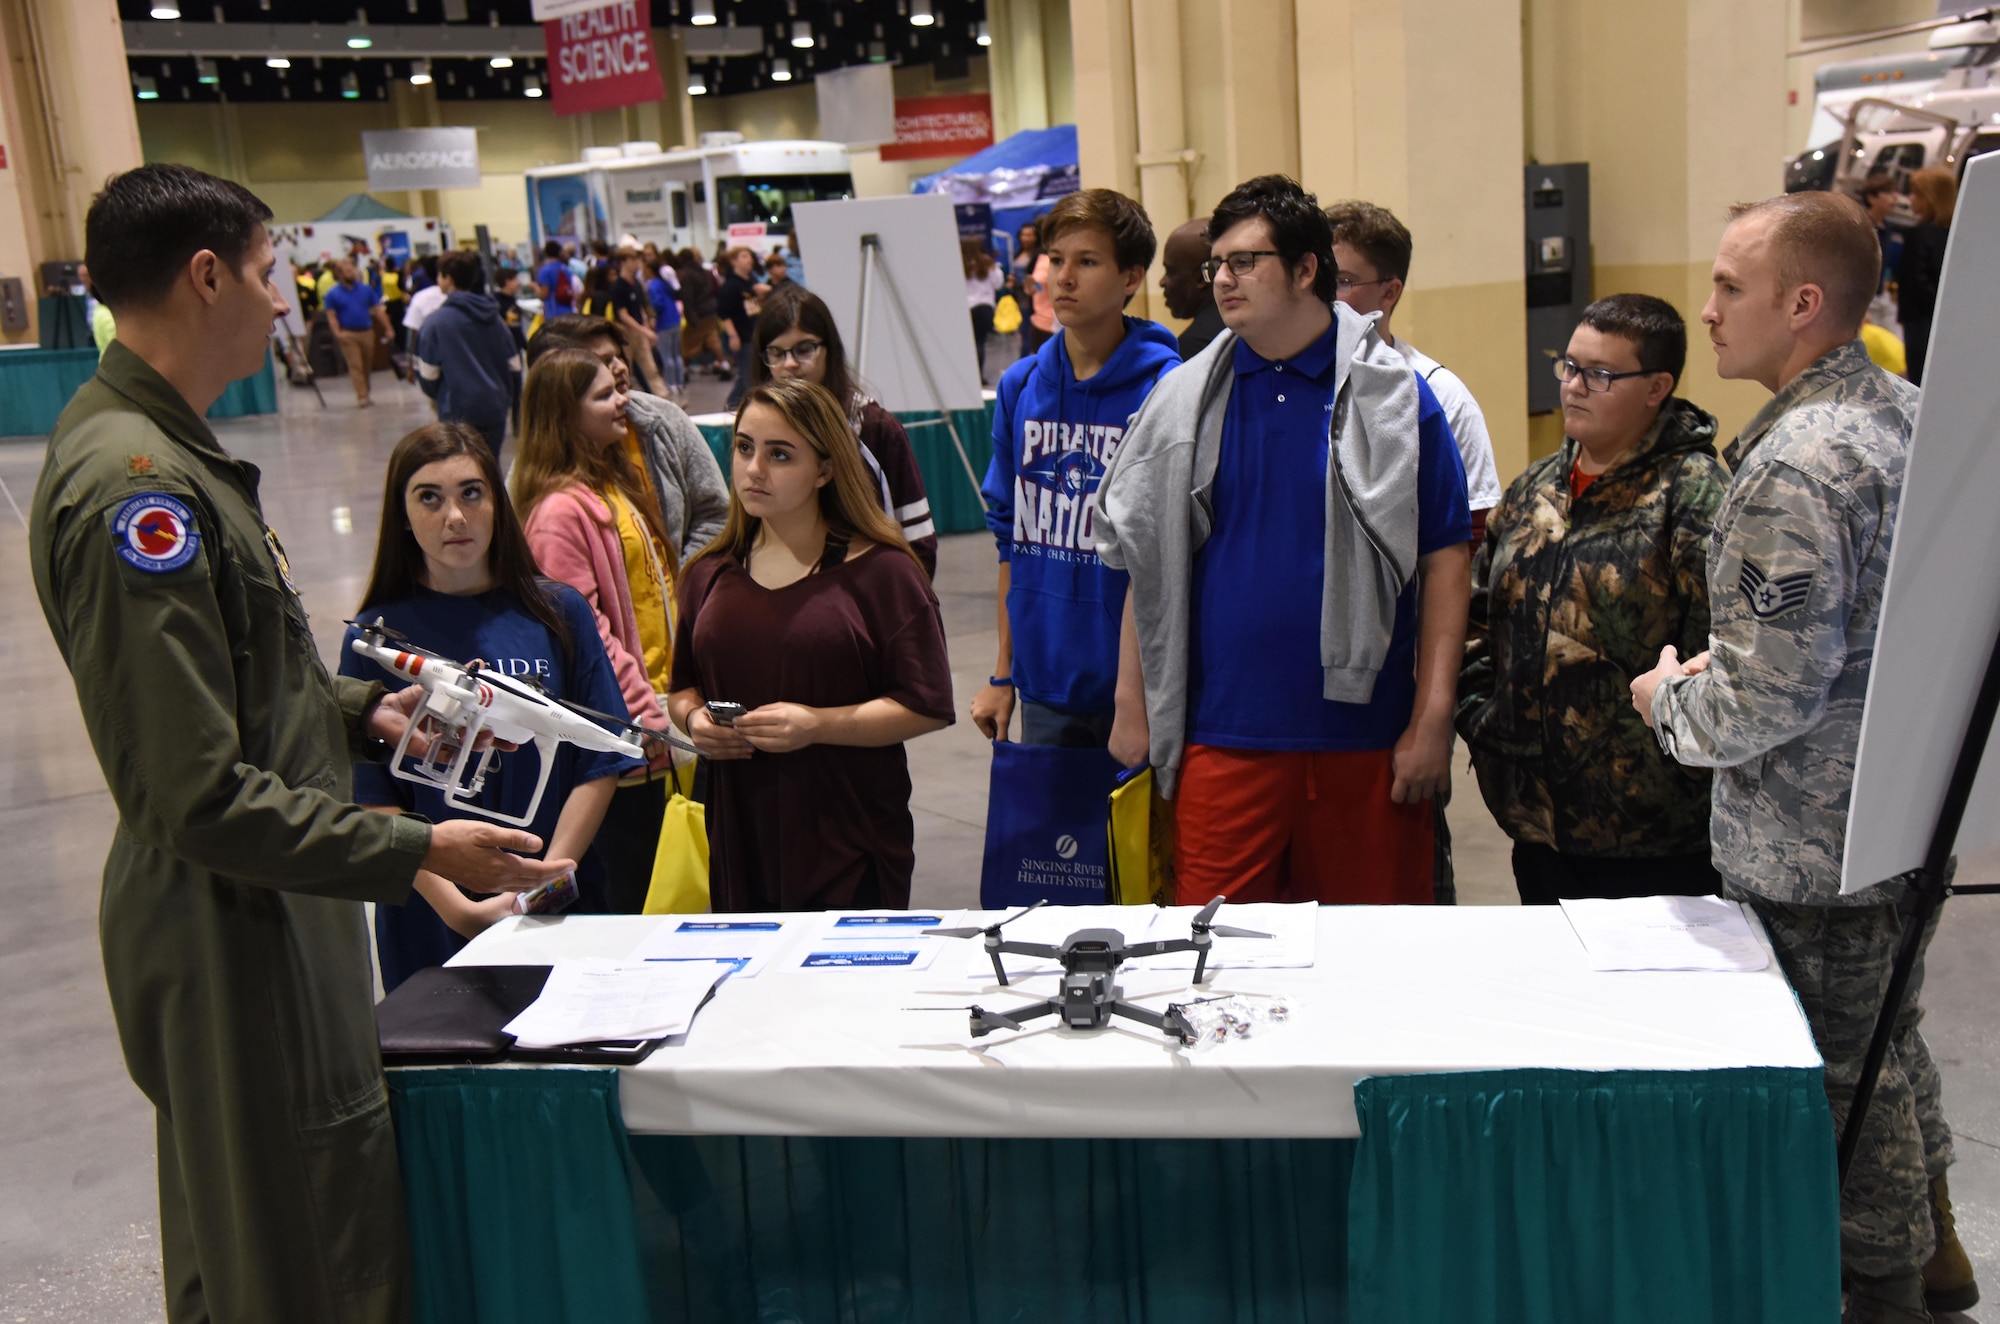 Maj. Dave Gentile, 53rd Weather Reconnaissance Squadron pilot, and Staff Sgt. Travis Schupp, 81st Operations Support Flight tower watch supervisor, explains the guidelines for flying drones near Keesler Air Force Base during the Pathways2Possibilities (P2P) event at the Mississippi Coast Coliseum & Convention Center Nov. 15, 2017, in Biloxi, Mississippi. P2P is a hands-on interactive career expo for all 8th graders and at-risk youth, ages 16-24 in South Mississippi. (U.S. Air Force photo by Kemberly Groue)